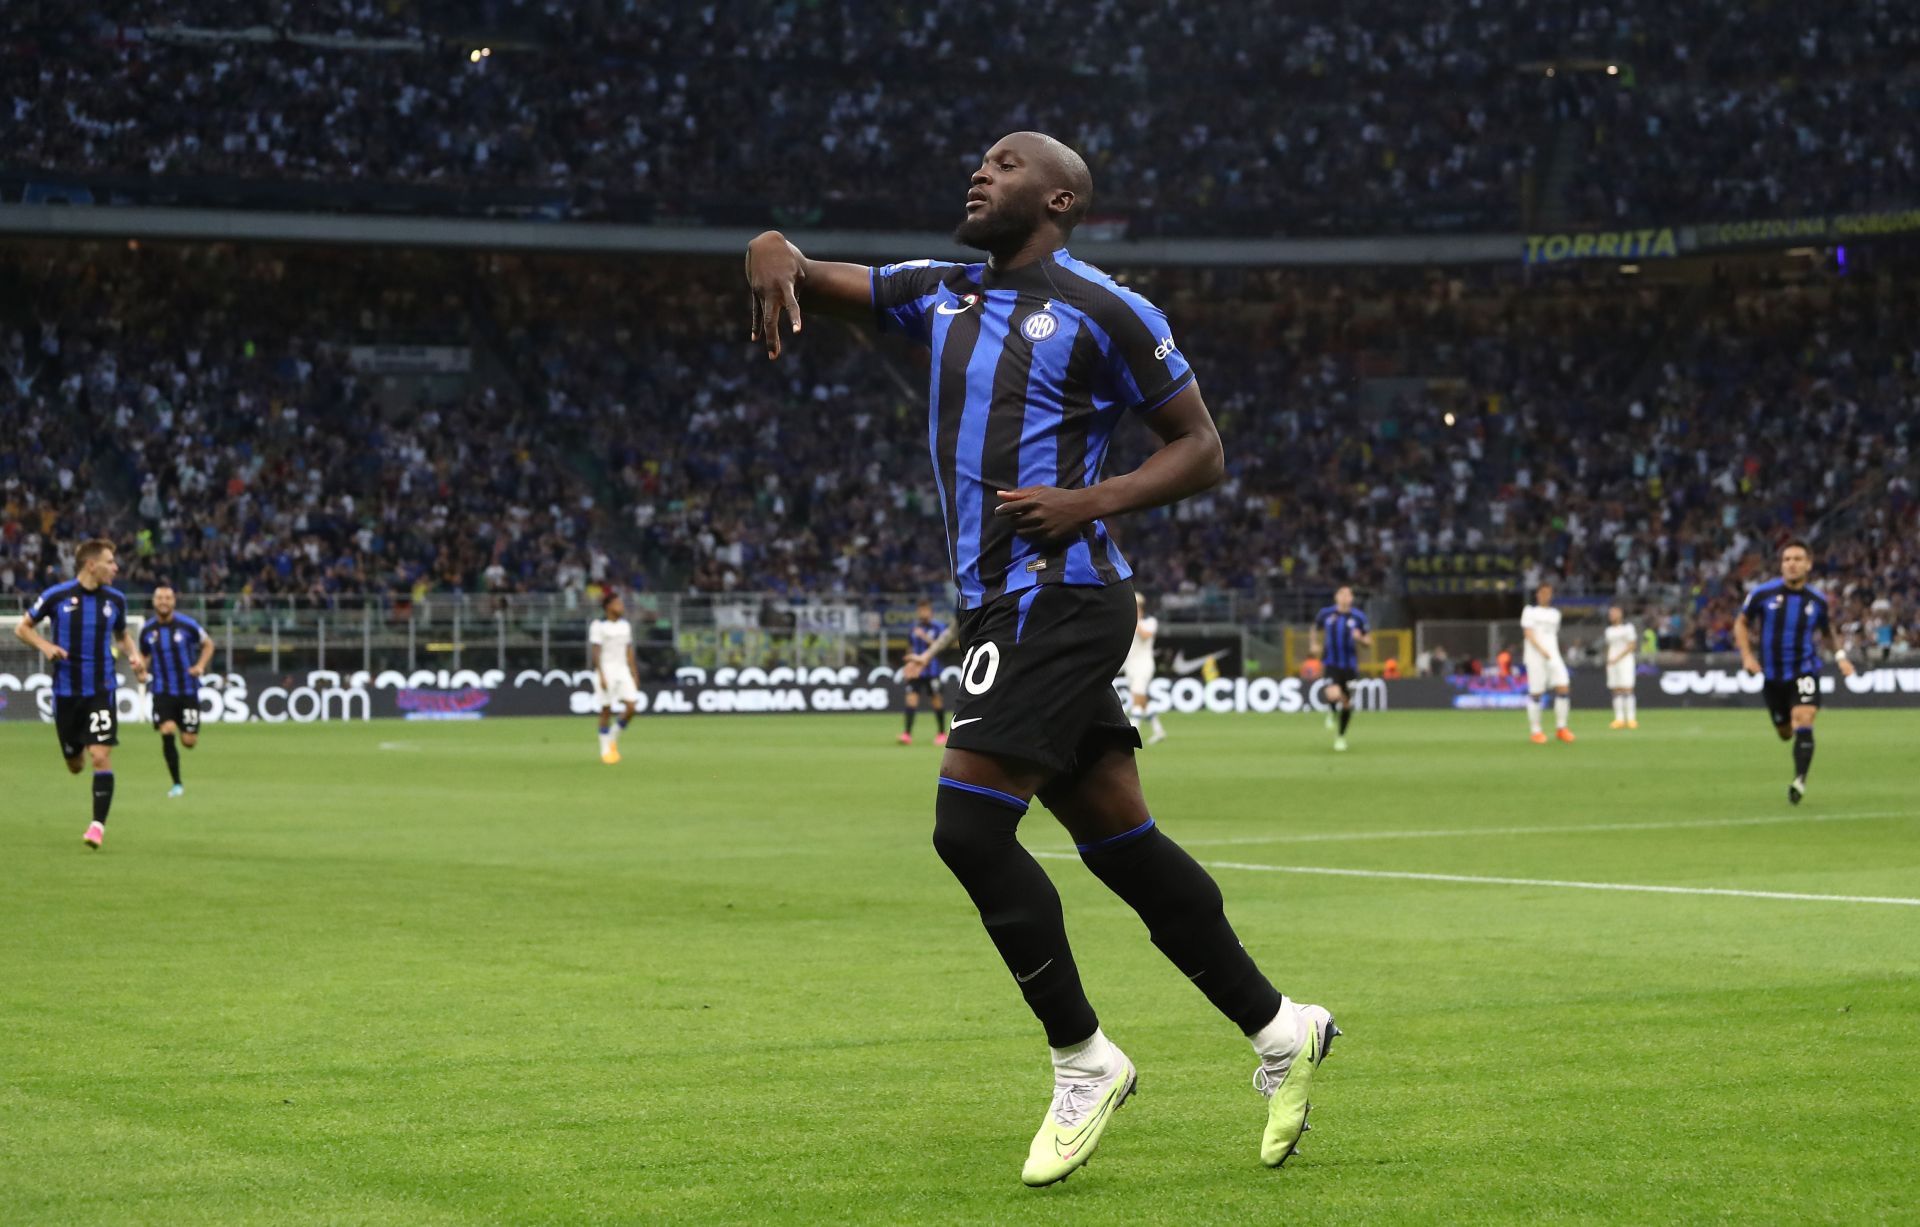 Lukaku has claimed that he wants to stay at Inter Milan.